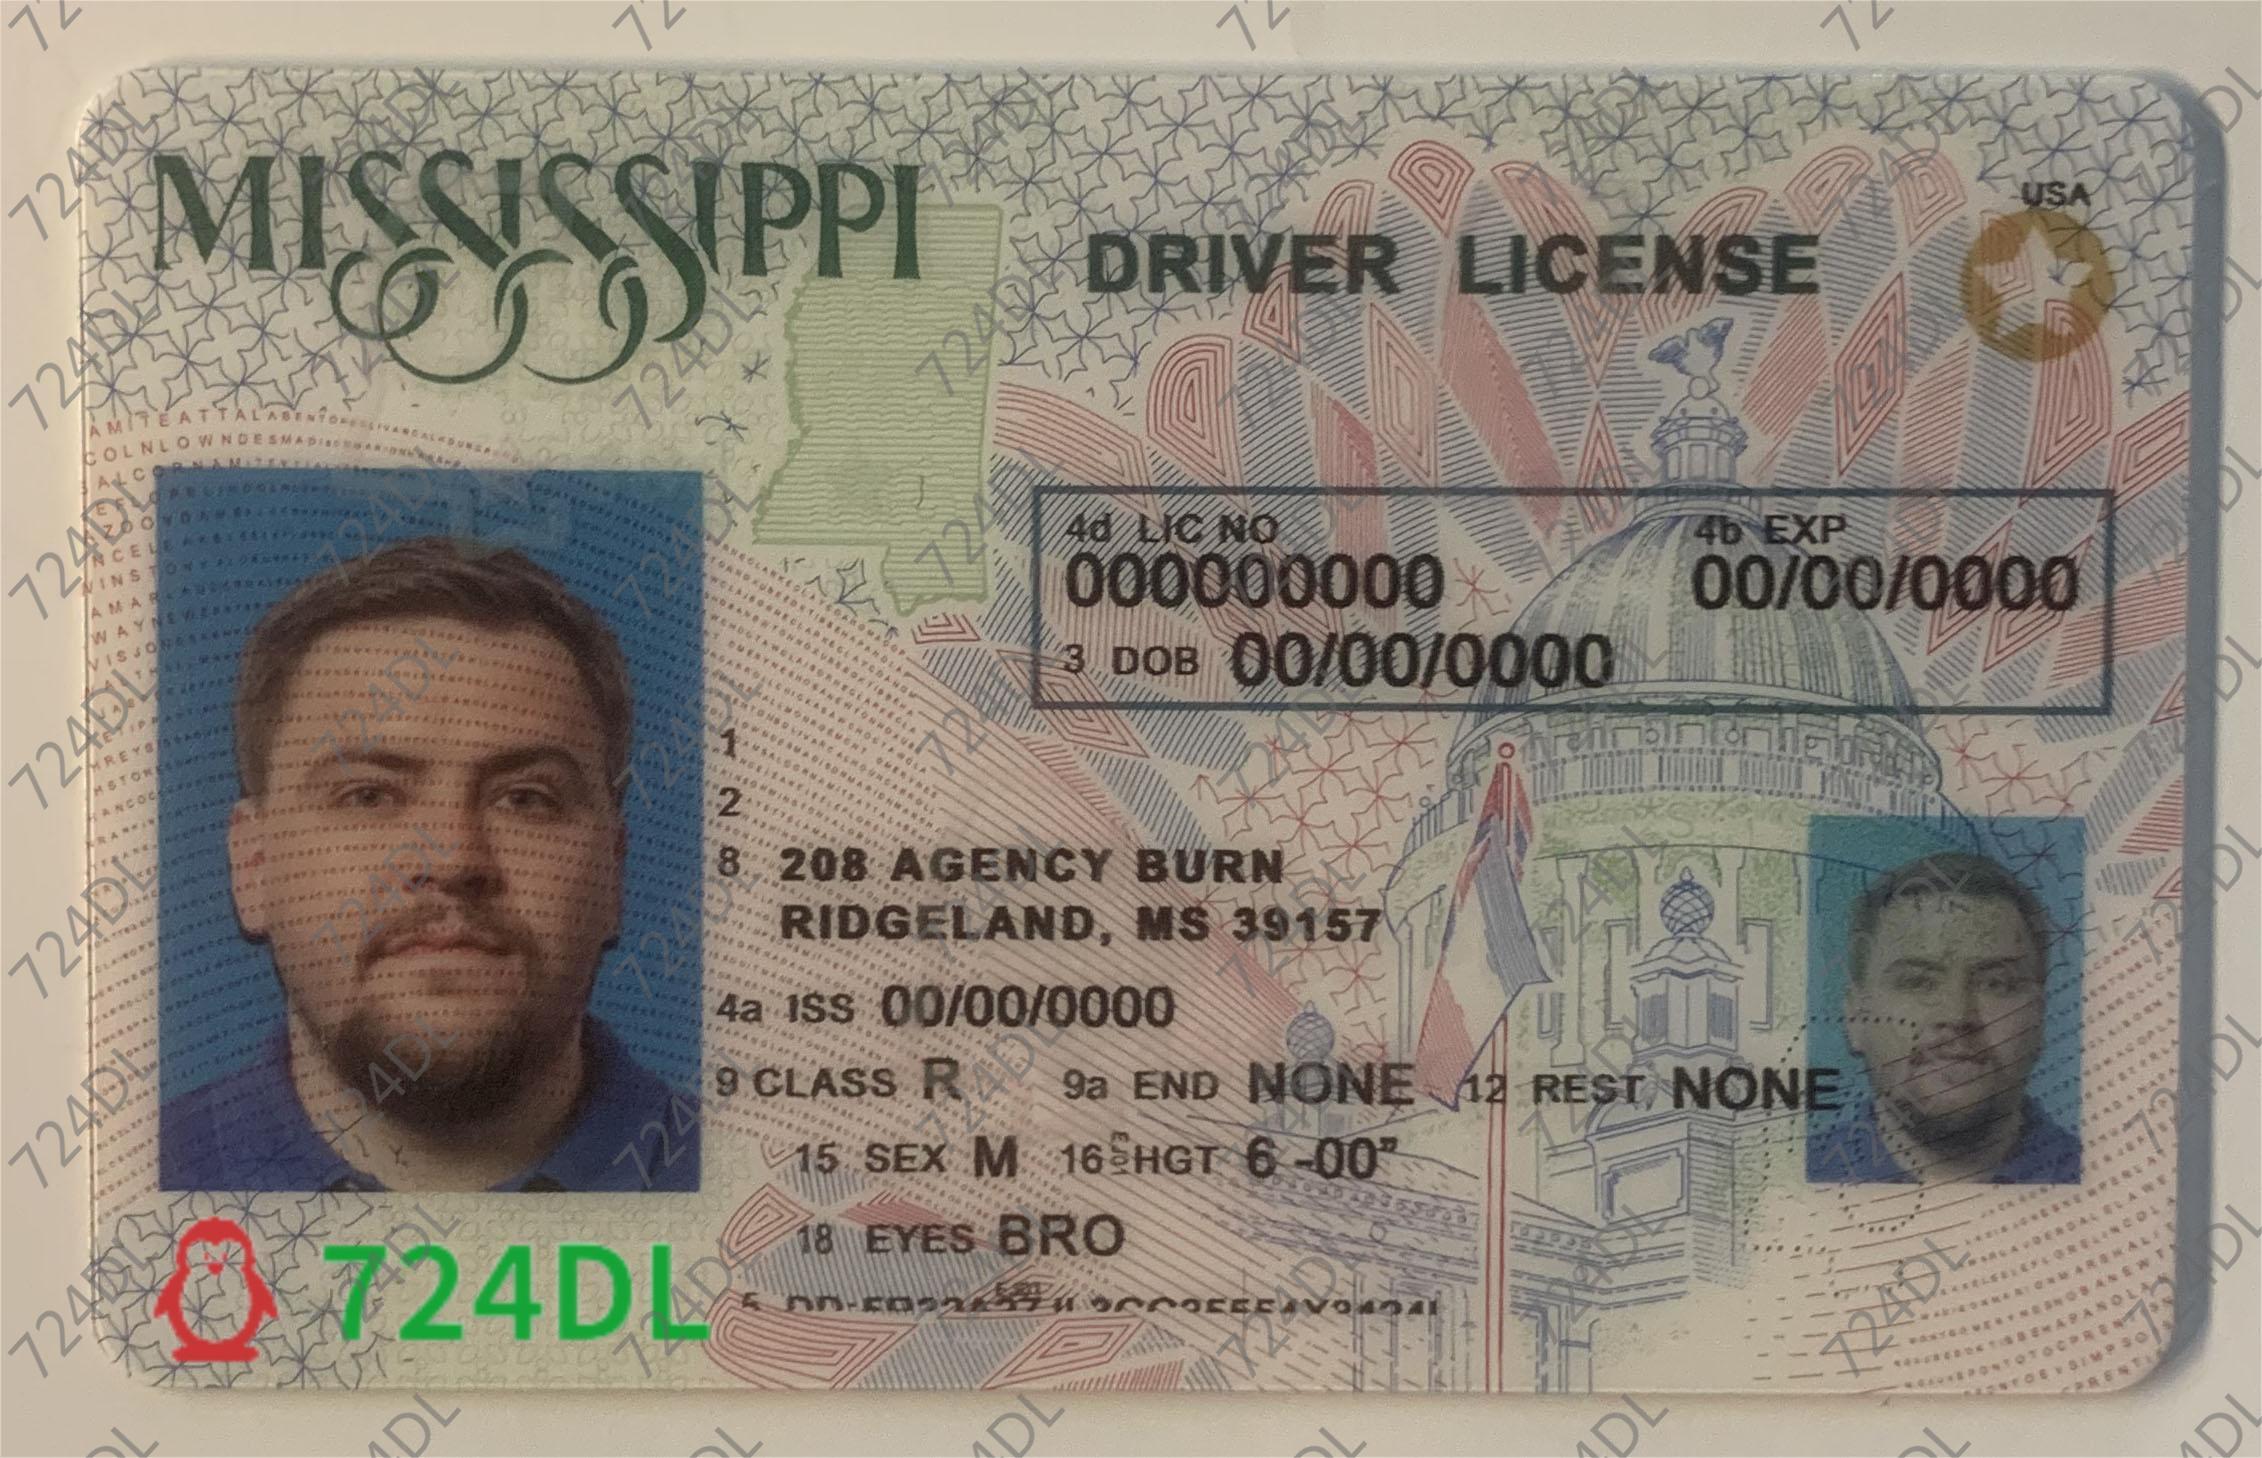 Get Your Scannable Fake id Online, Order Low Price Fake Driving License ...